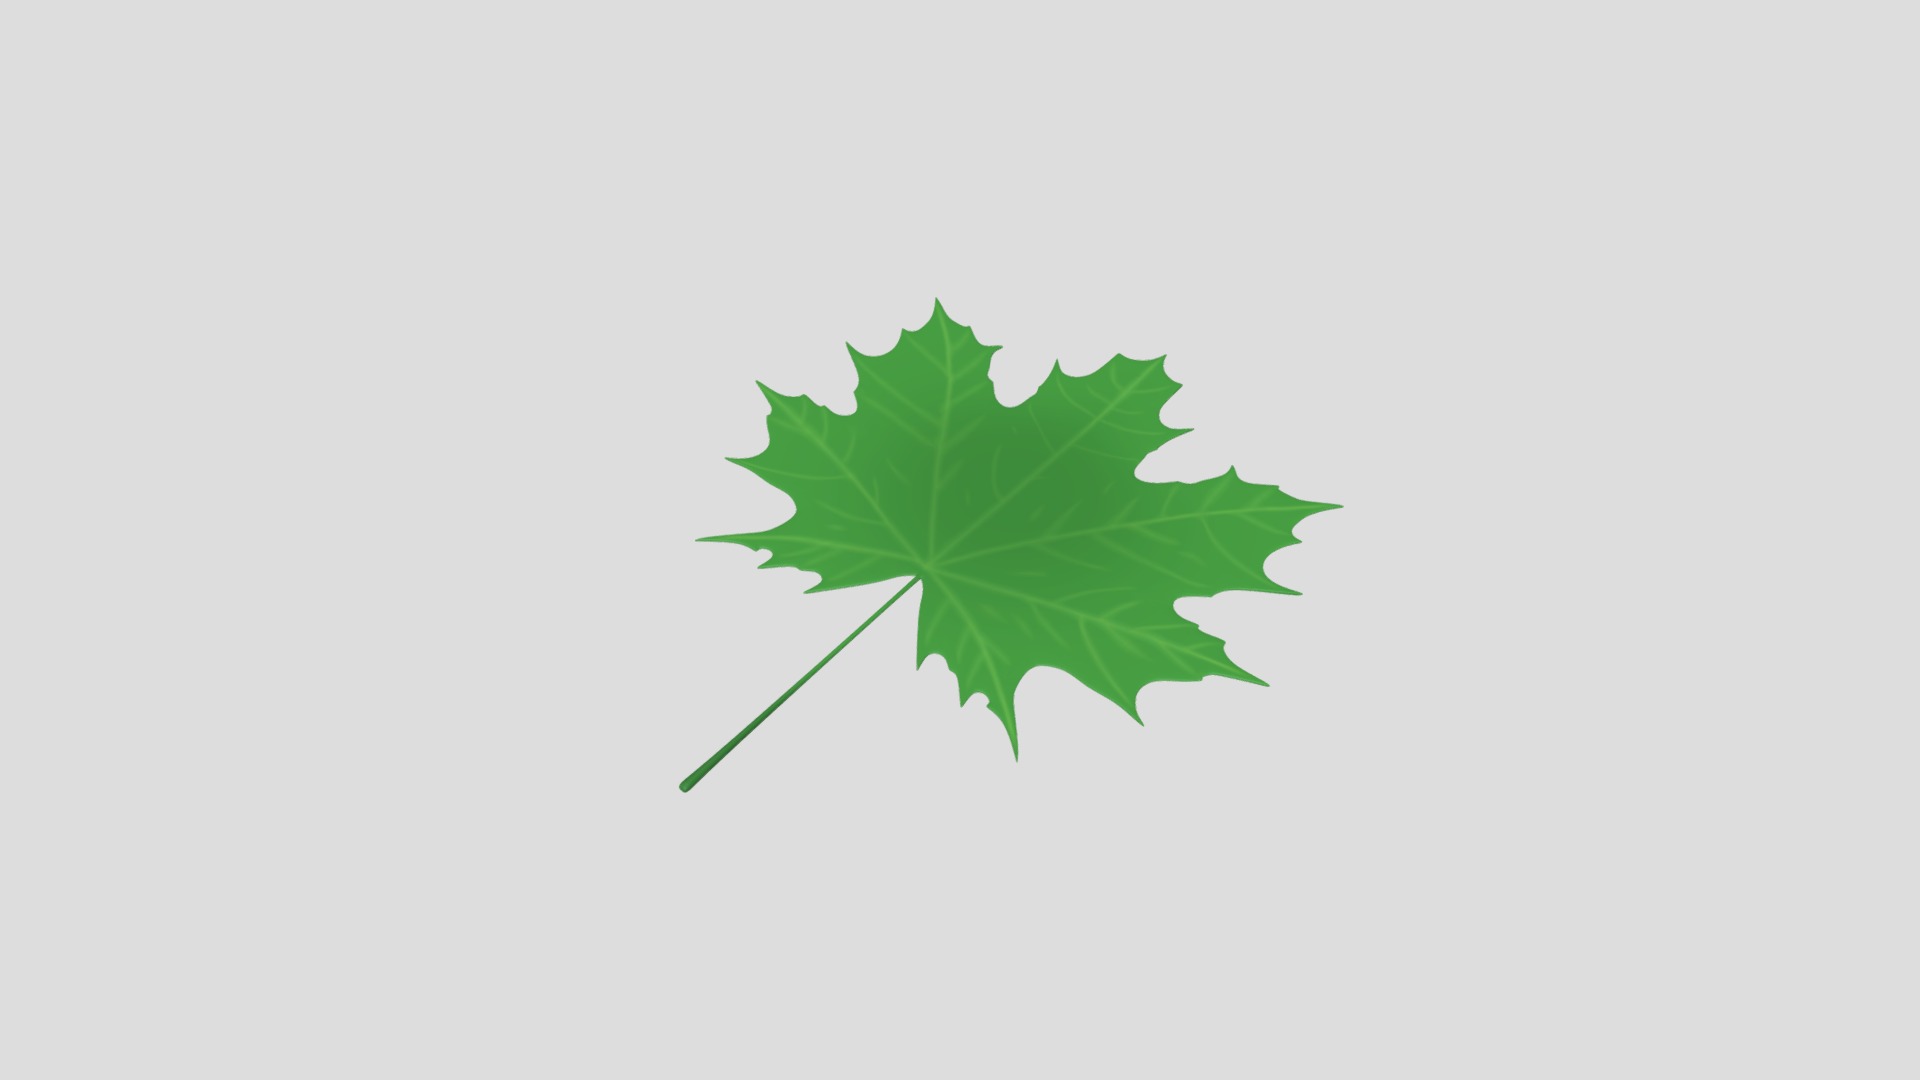 3D model Maple Leaf - This is a 3D model of the Maple Leaf. The 3D model is about a green leaf on a white background.